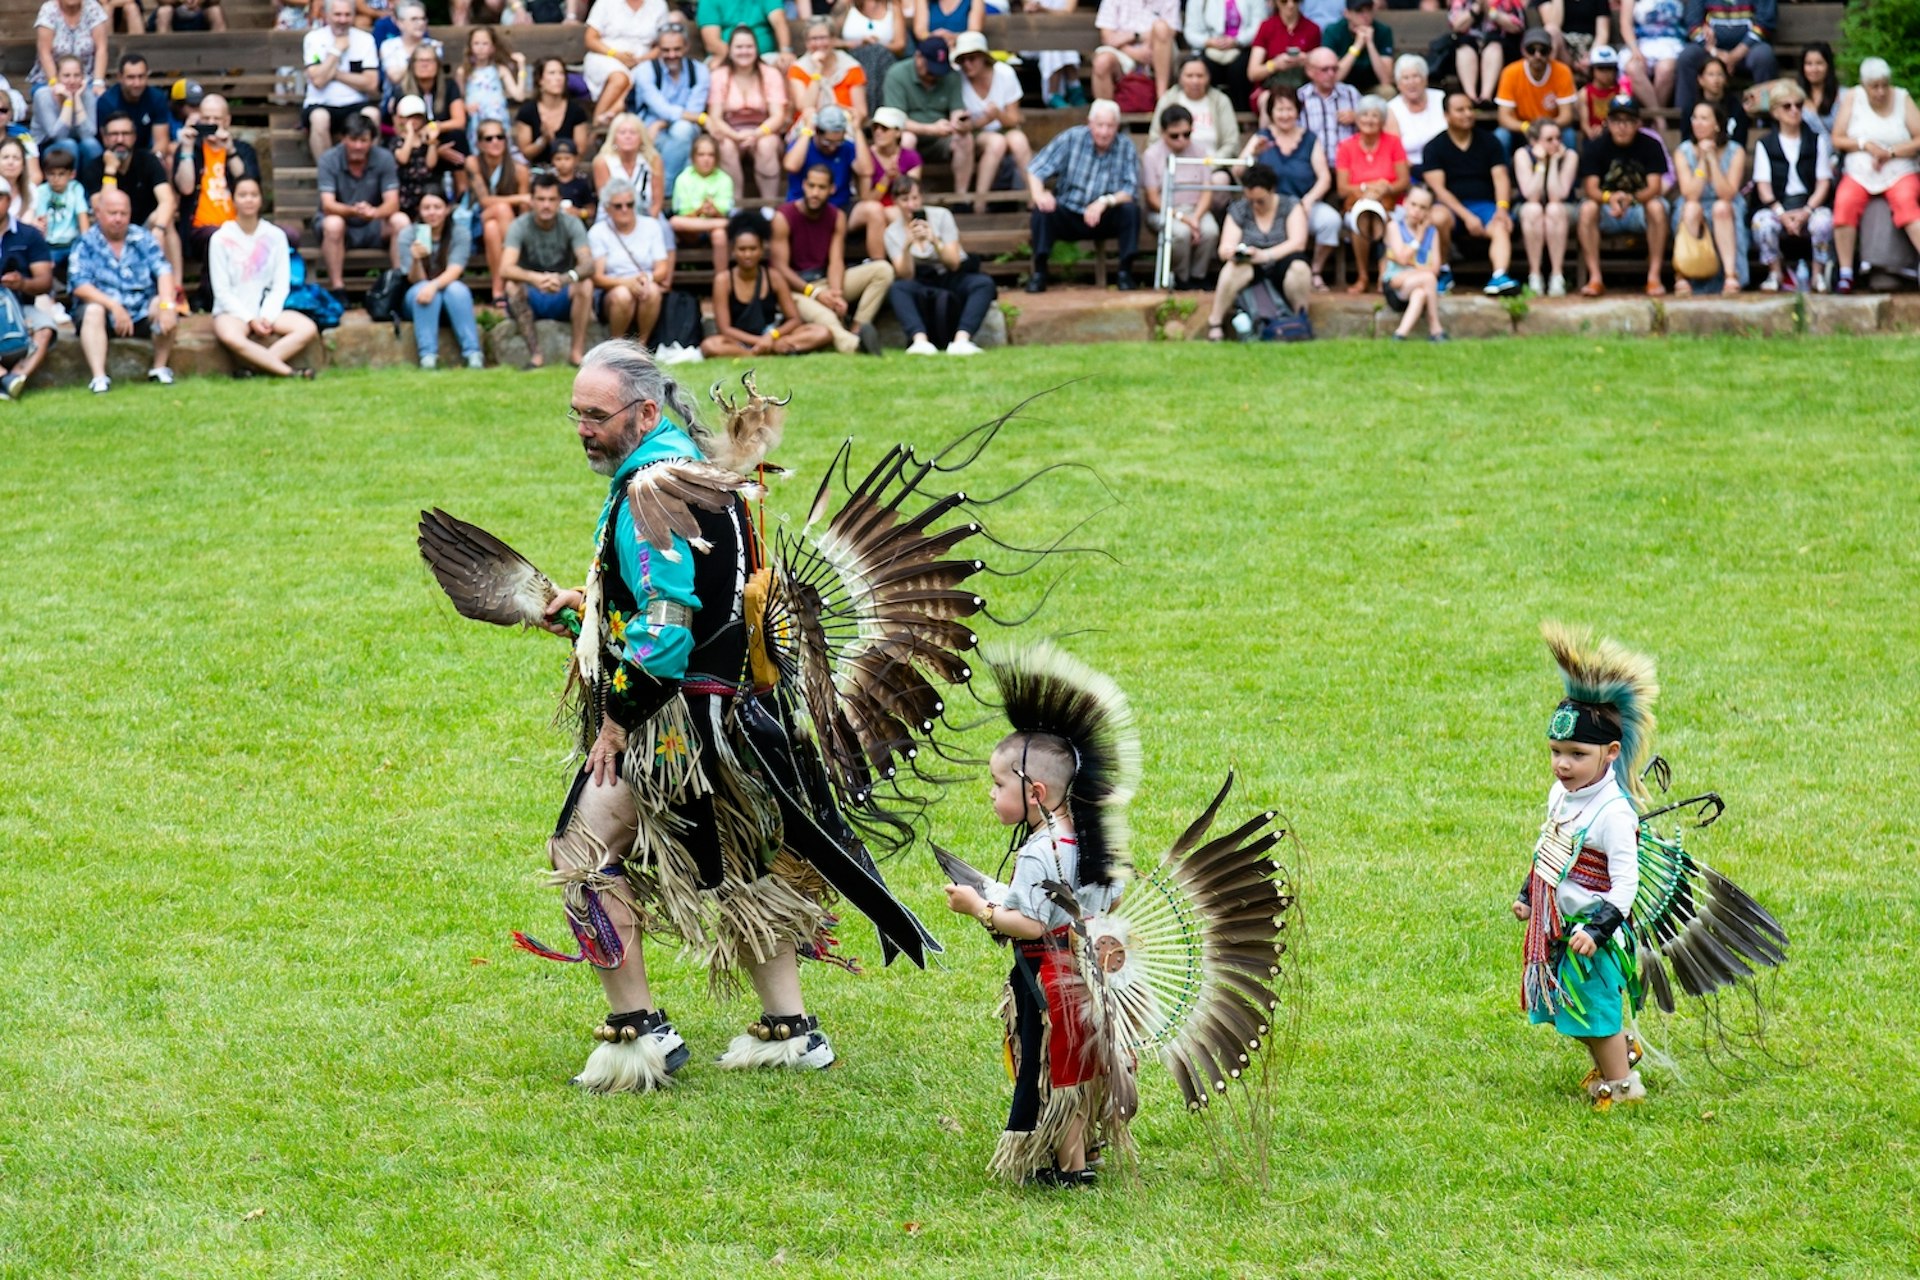 A man and two small Indigenous boys dressed in ceremonial costume for the annual pow wow dancing in Wendake, Québec